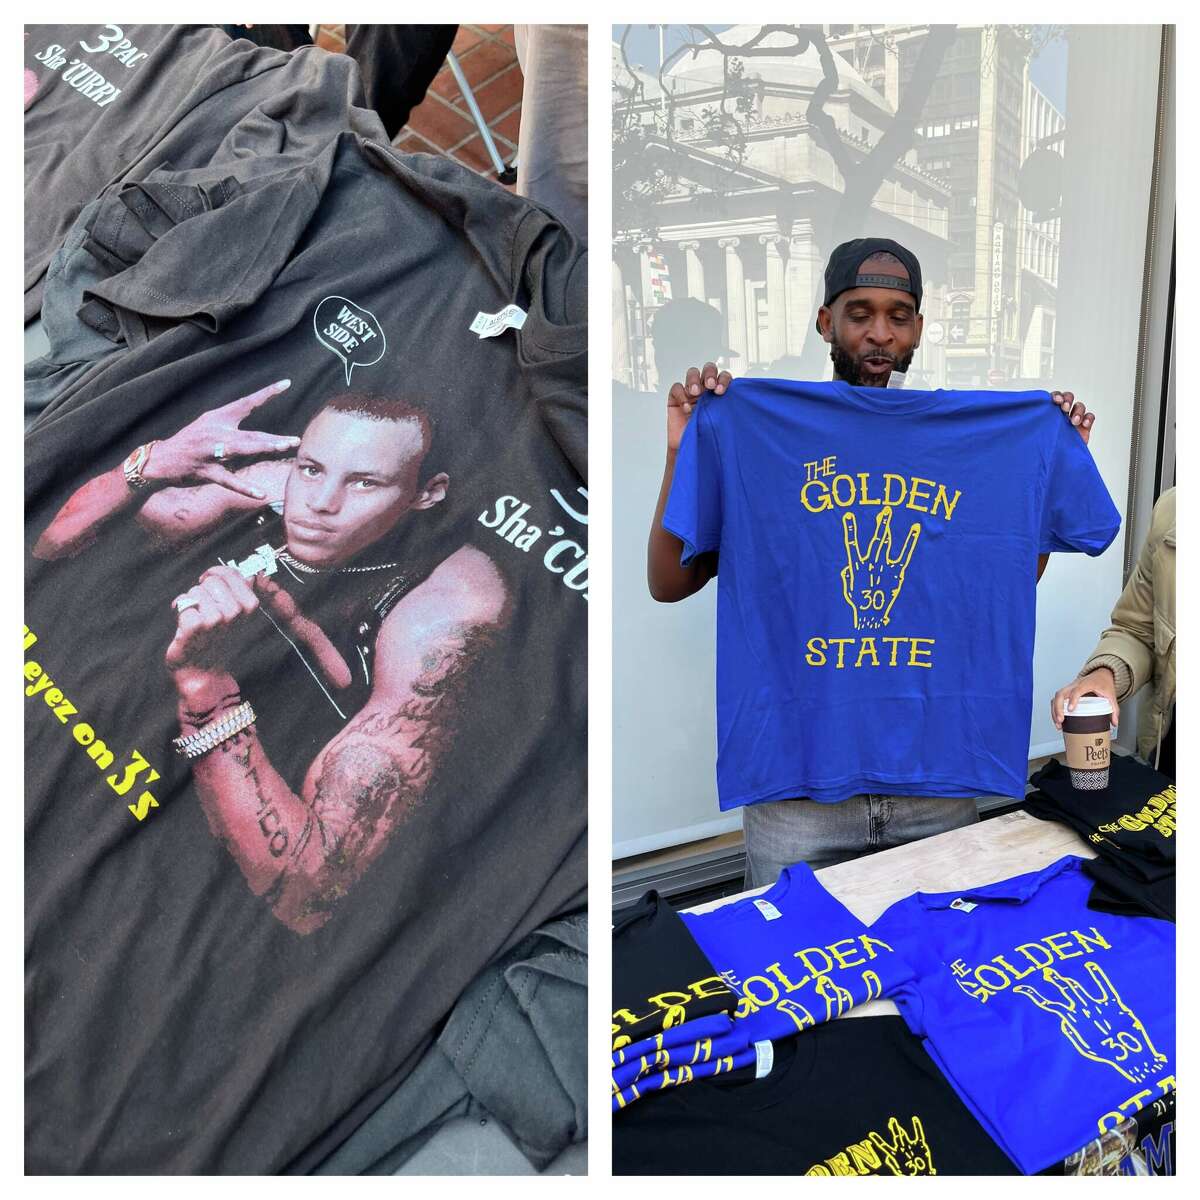 Off-brand Golden State Warriors merchandise could be found up and down Market St. during Monday's NBA Championship parade.